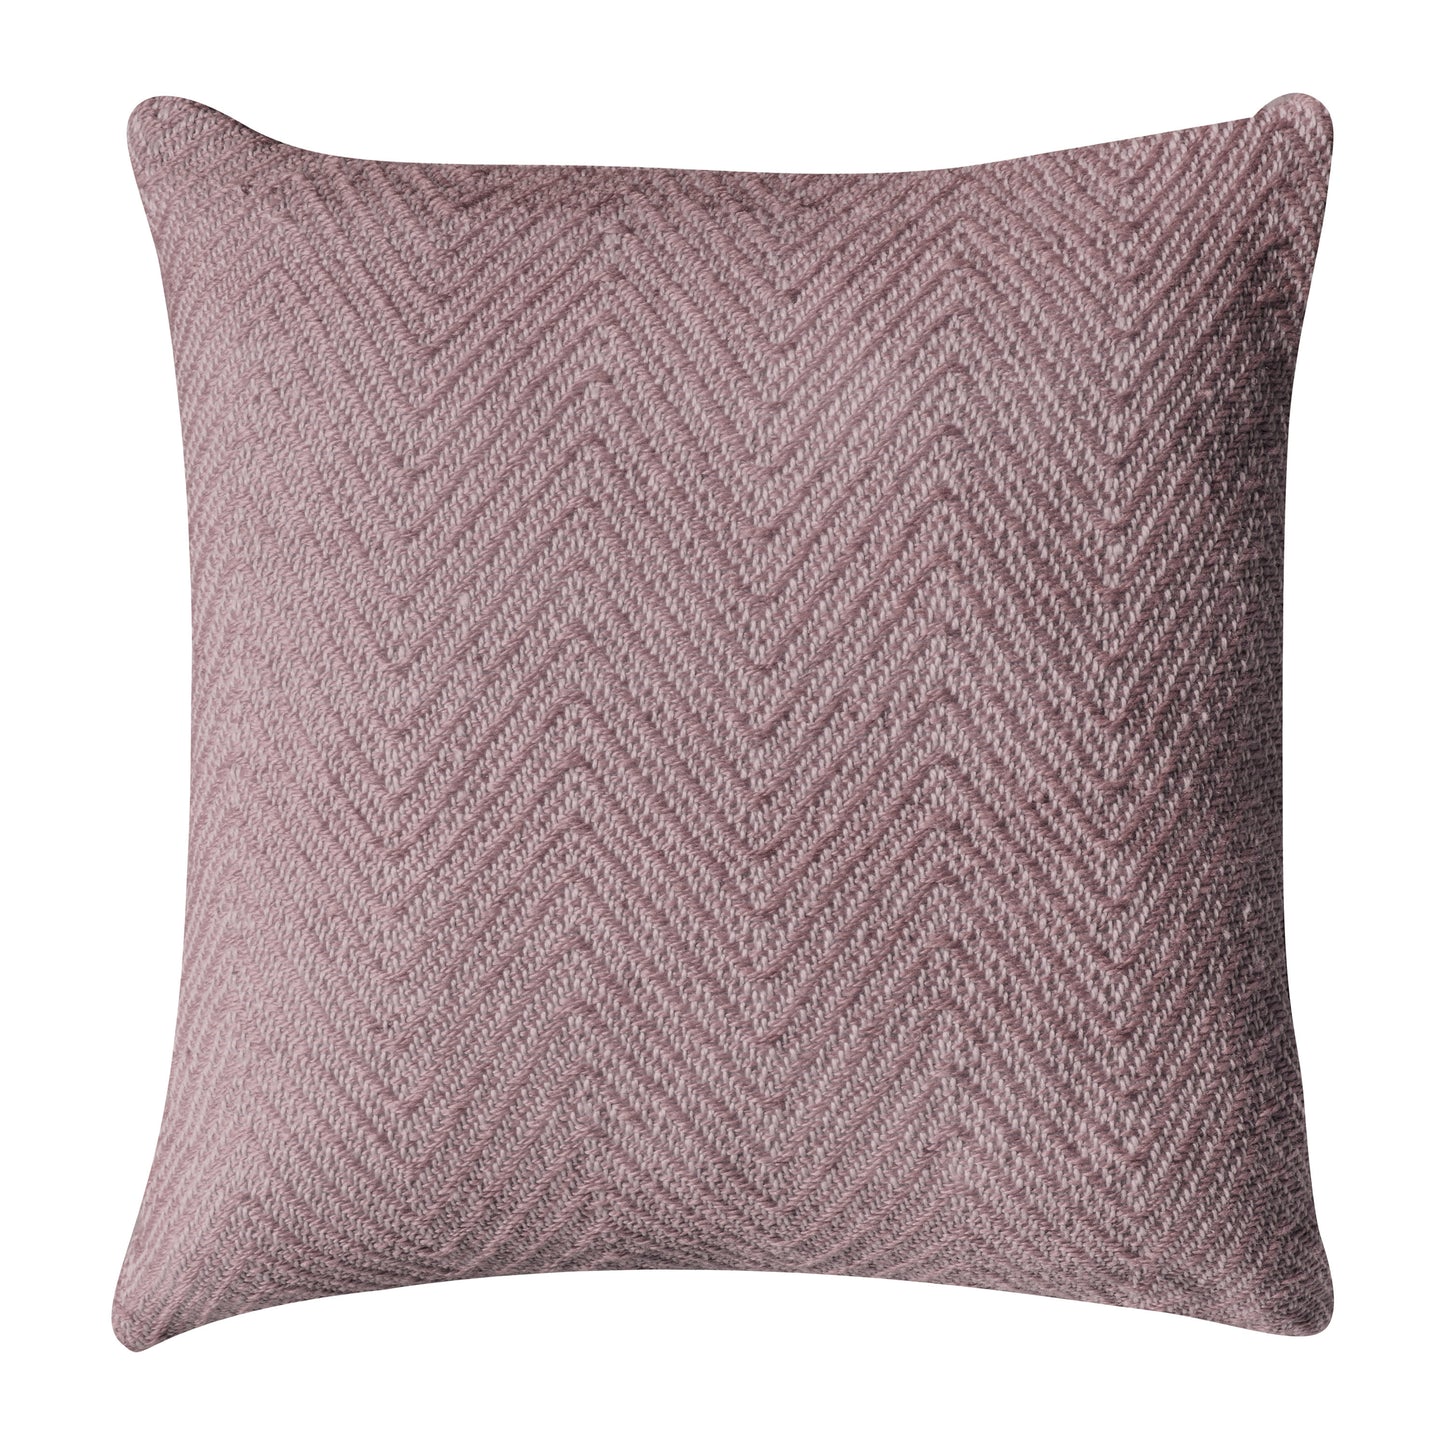 A PET Chevron Cushion Blush 450x450mm for home furniture and interior decor from Kikiathome.co.uk with a pink chevron pattern.